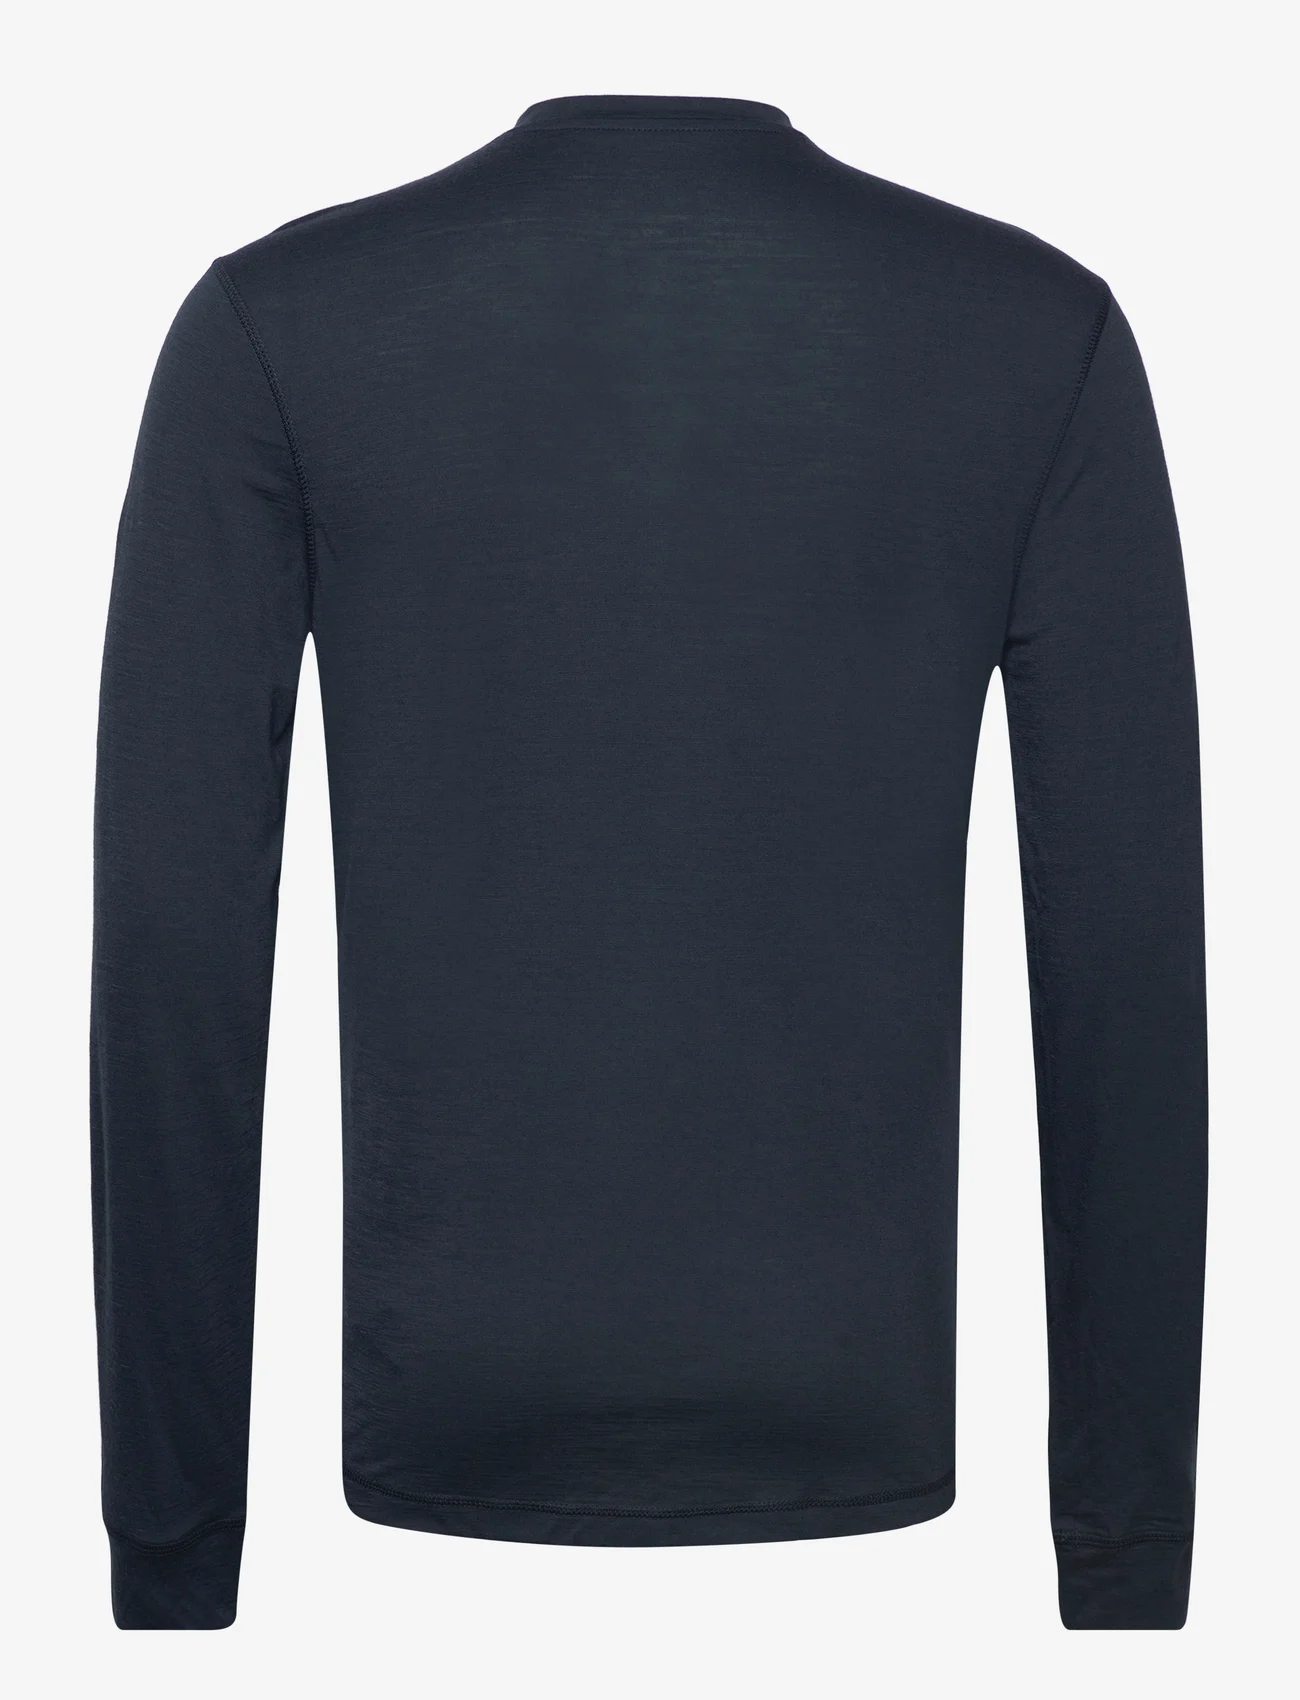 super.natural - M TUNDRA175 LS - base layer tops - blueberry - 1